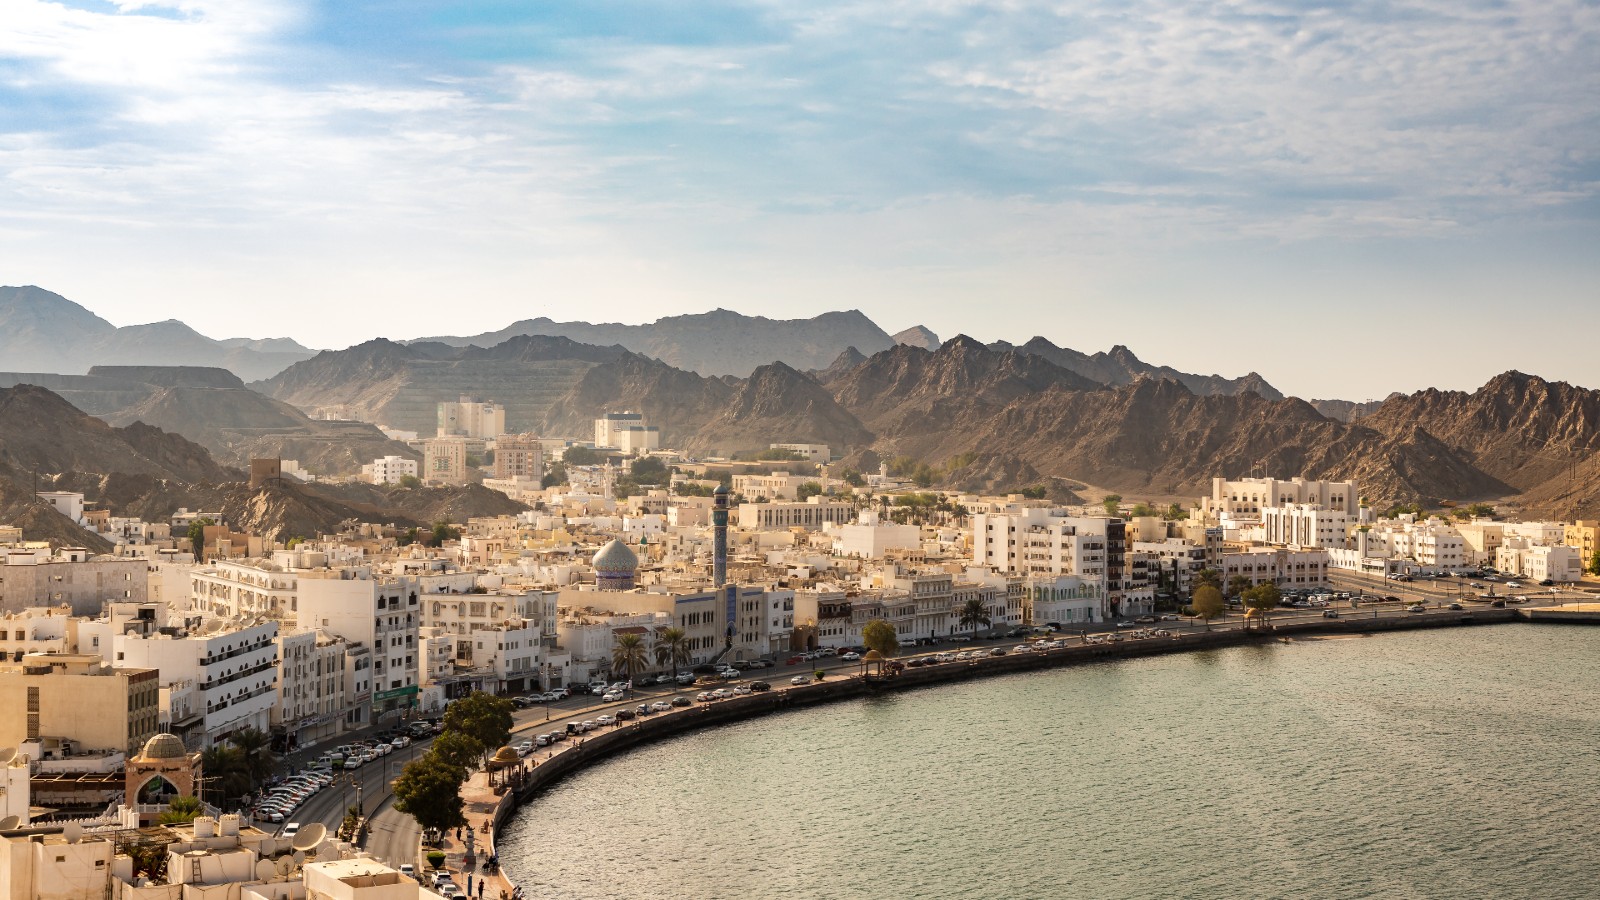 Picturesque shot of Muscat bordering the sea in Oman